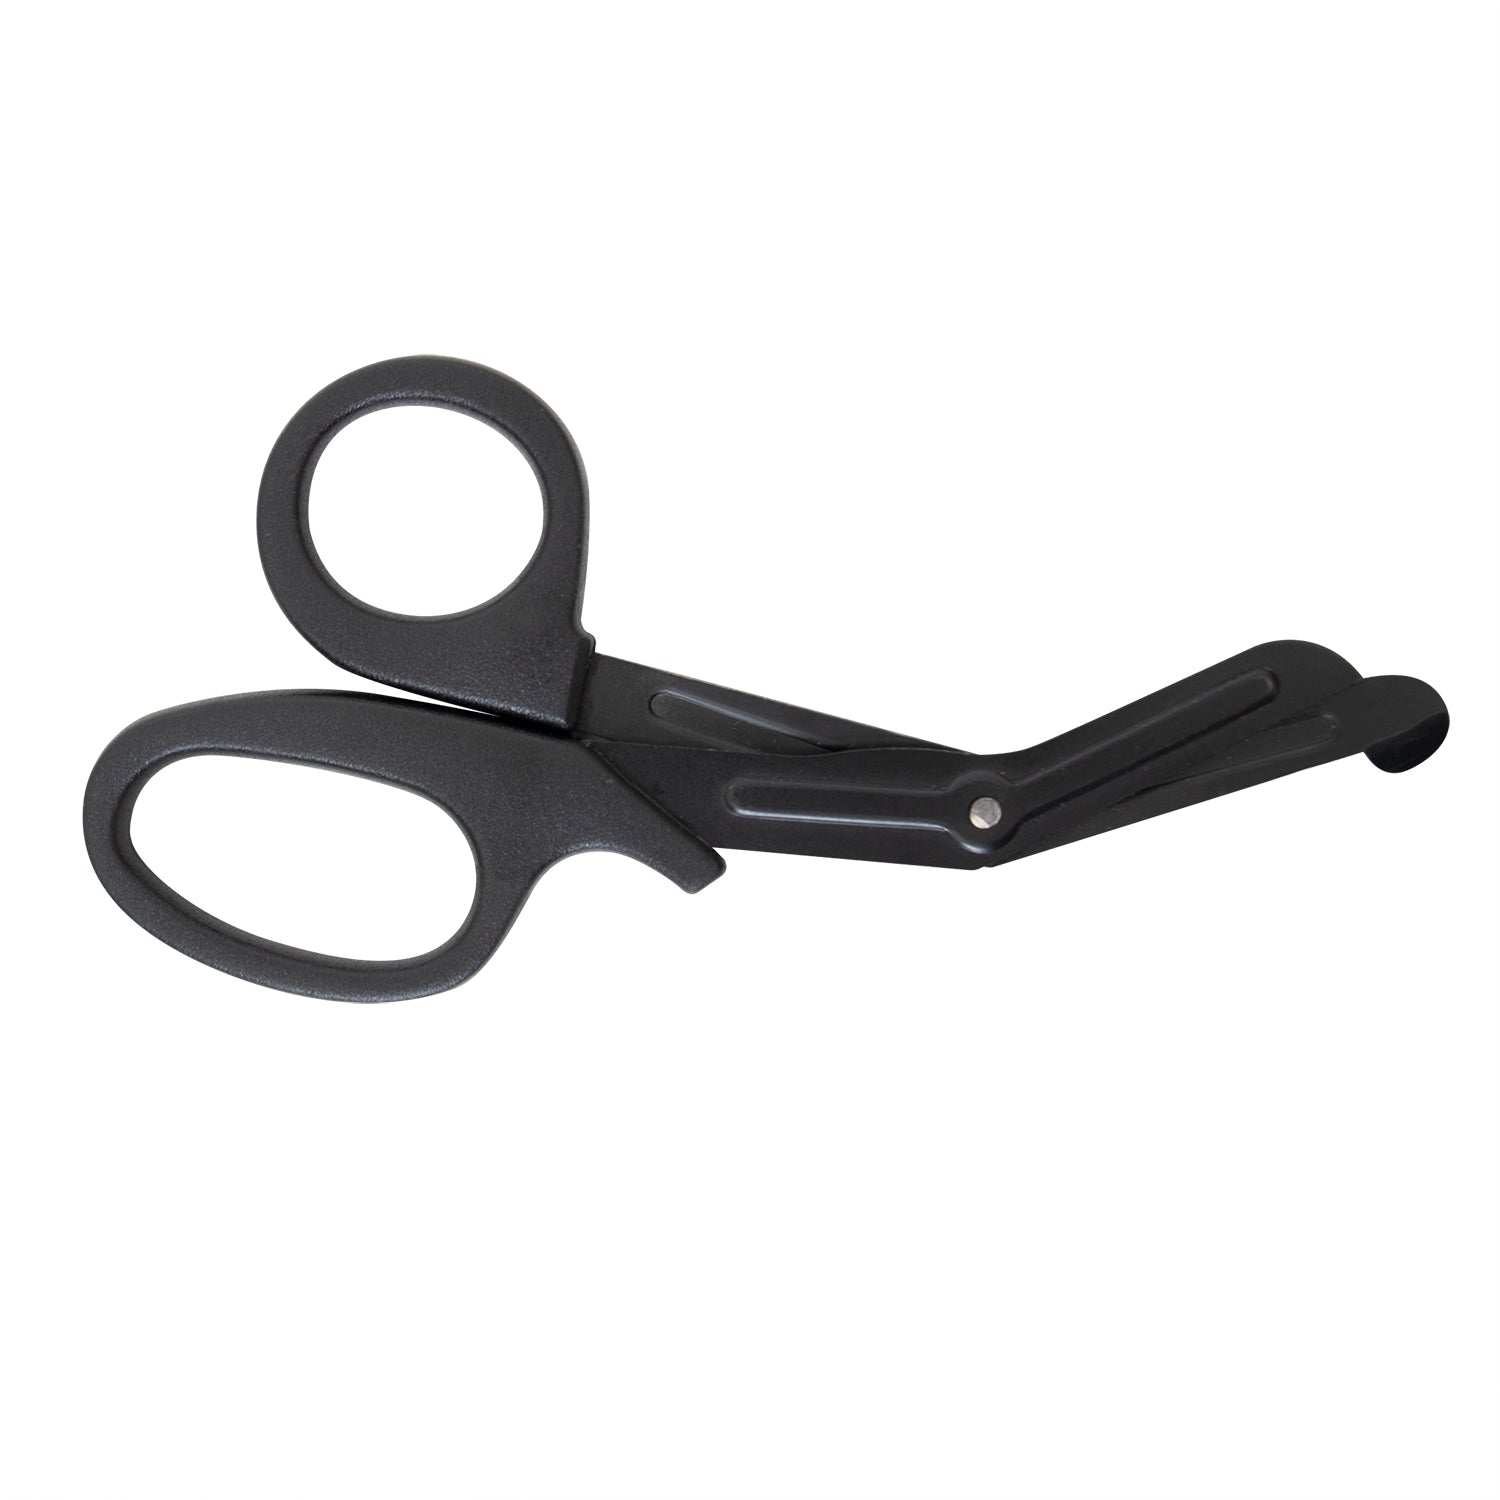 Rothco Deluxe EMS Shears - Tactical Choice Plus